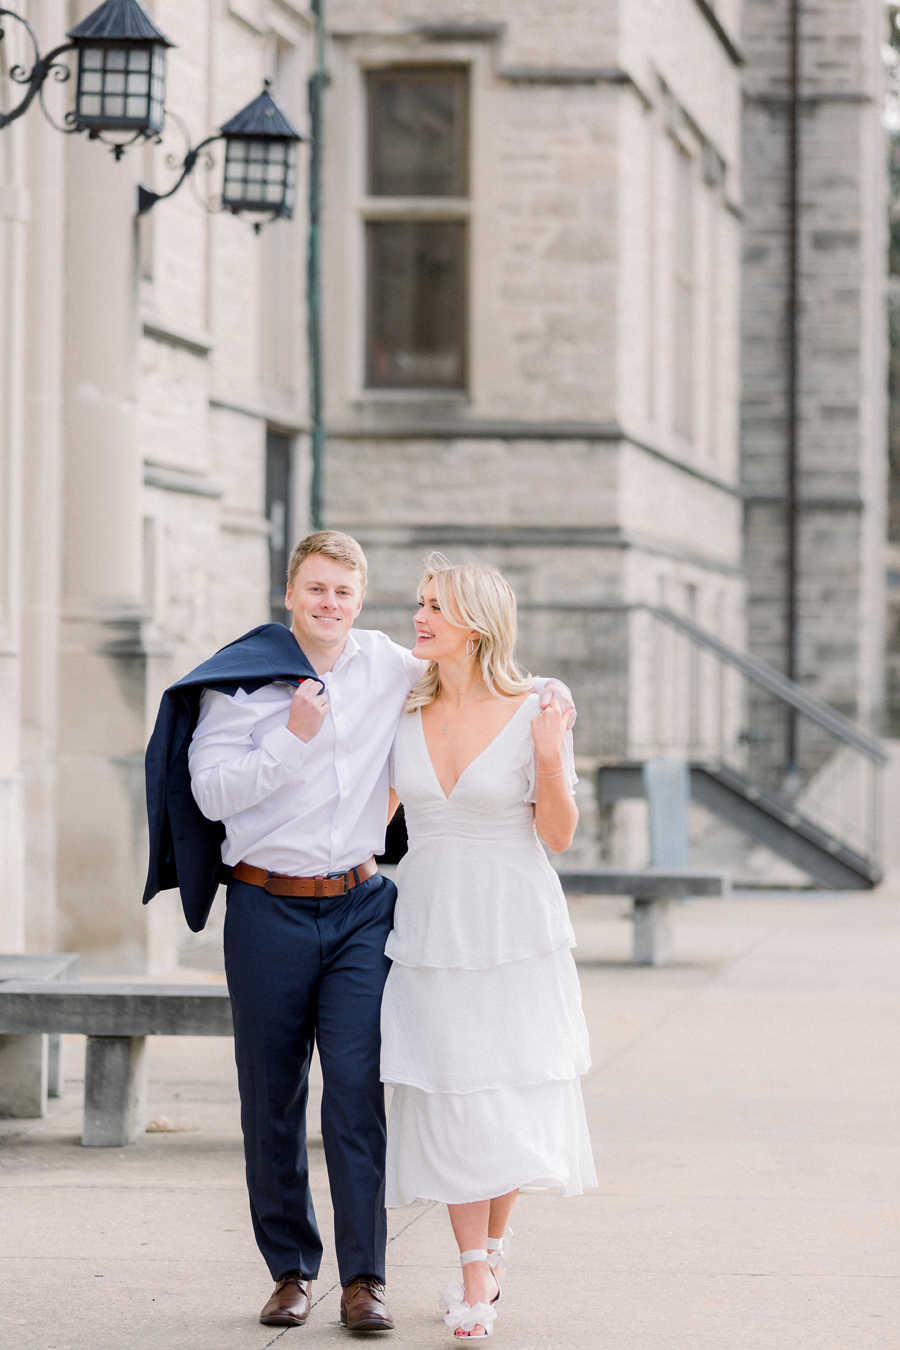 A couple takes photos on Mizzou Campus for their engagement session in downtown Columbia, Missouri by Love Tree Studios.